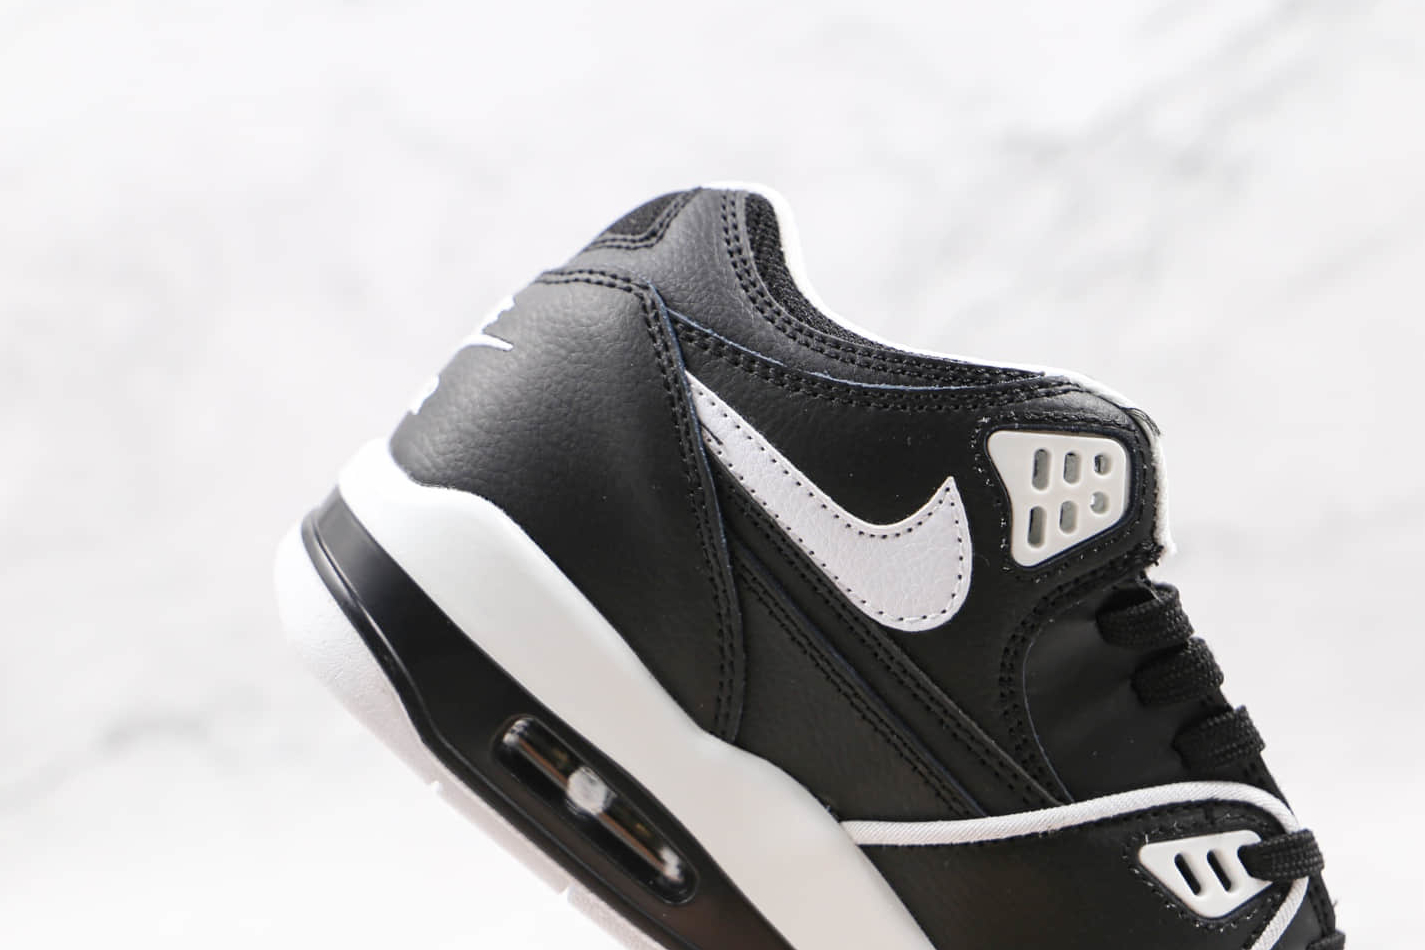 Nike Air Flight 89 'Black White' CT1570-001 - Shop Now for Classic Sneaker Style